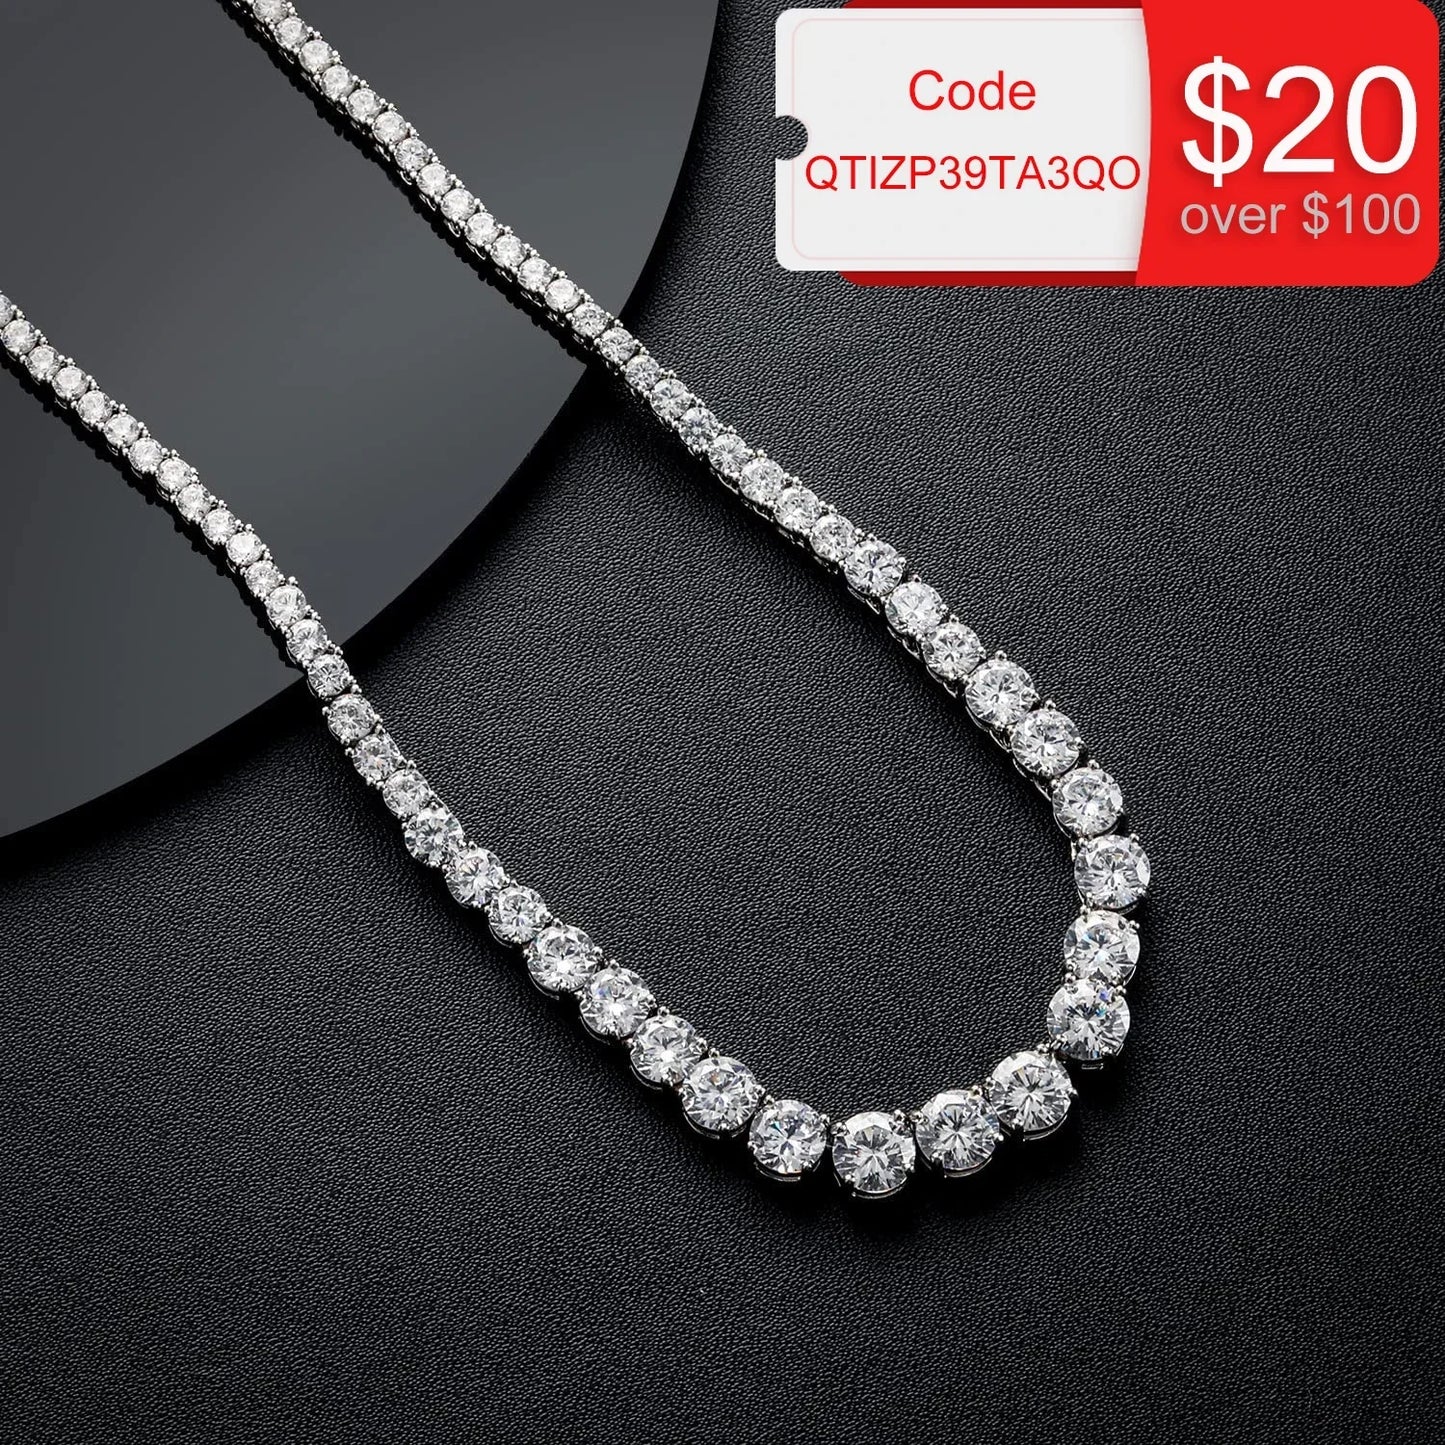 Gradient Diamond Necklaces for women 925 Sterling Silver Neck Chain